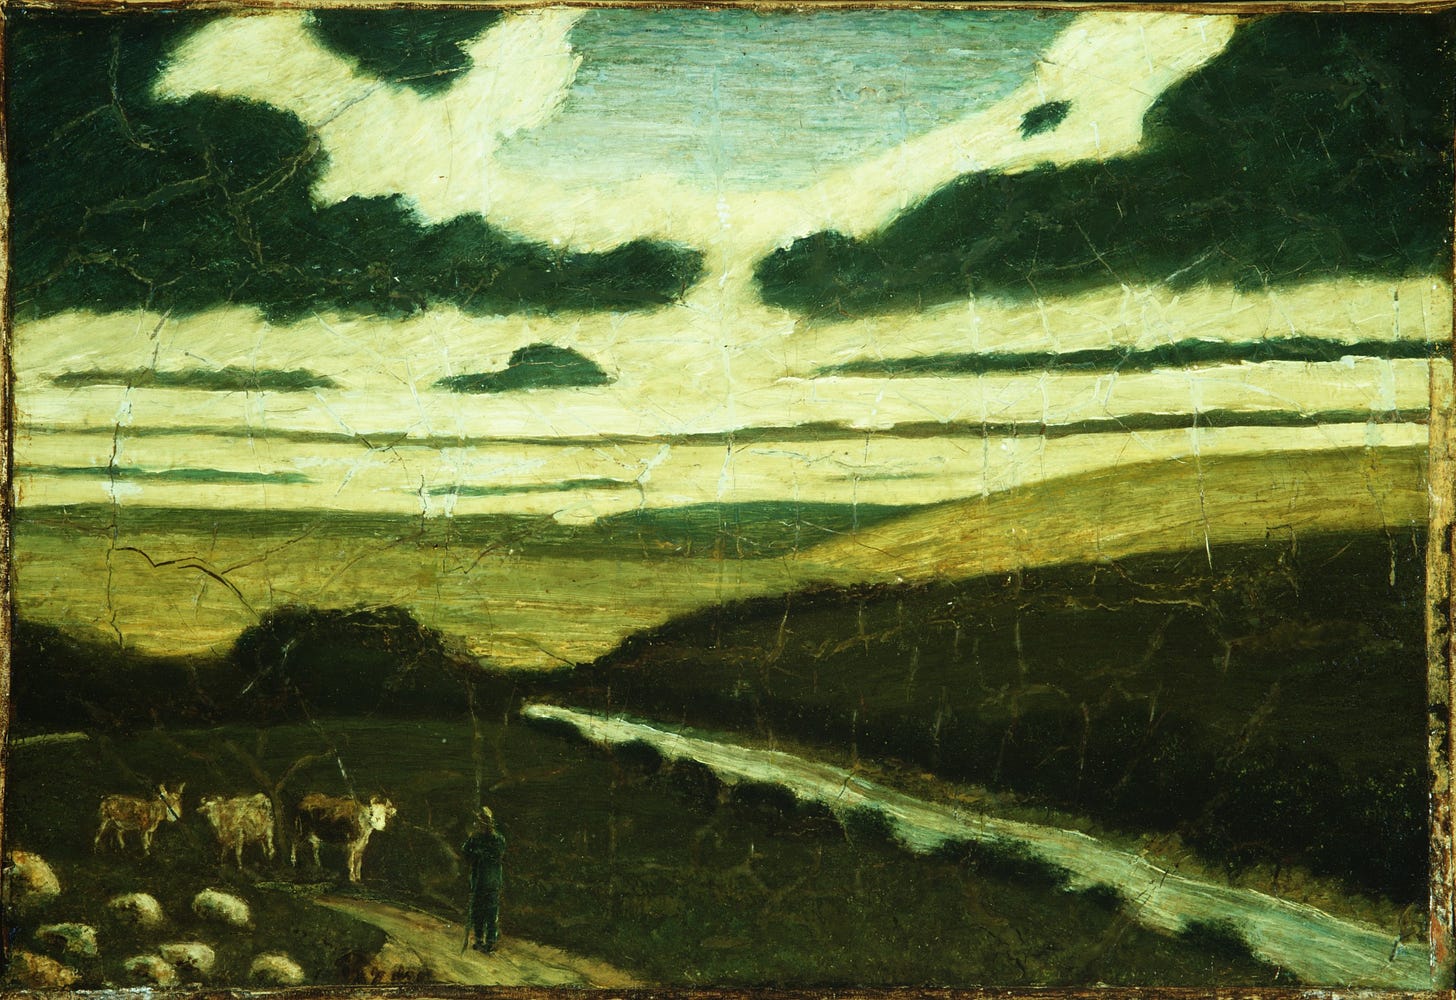 A painting of a man tending cows on a vast, dark landscape.